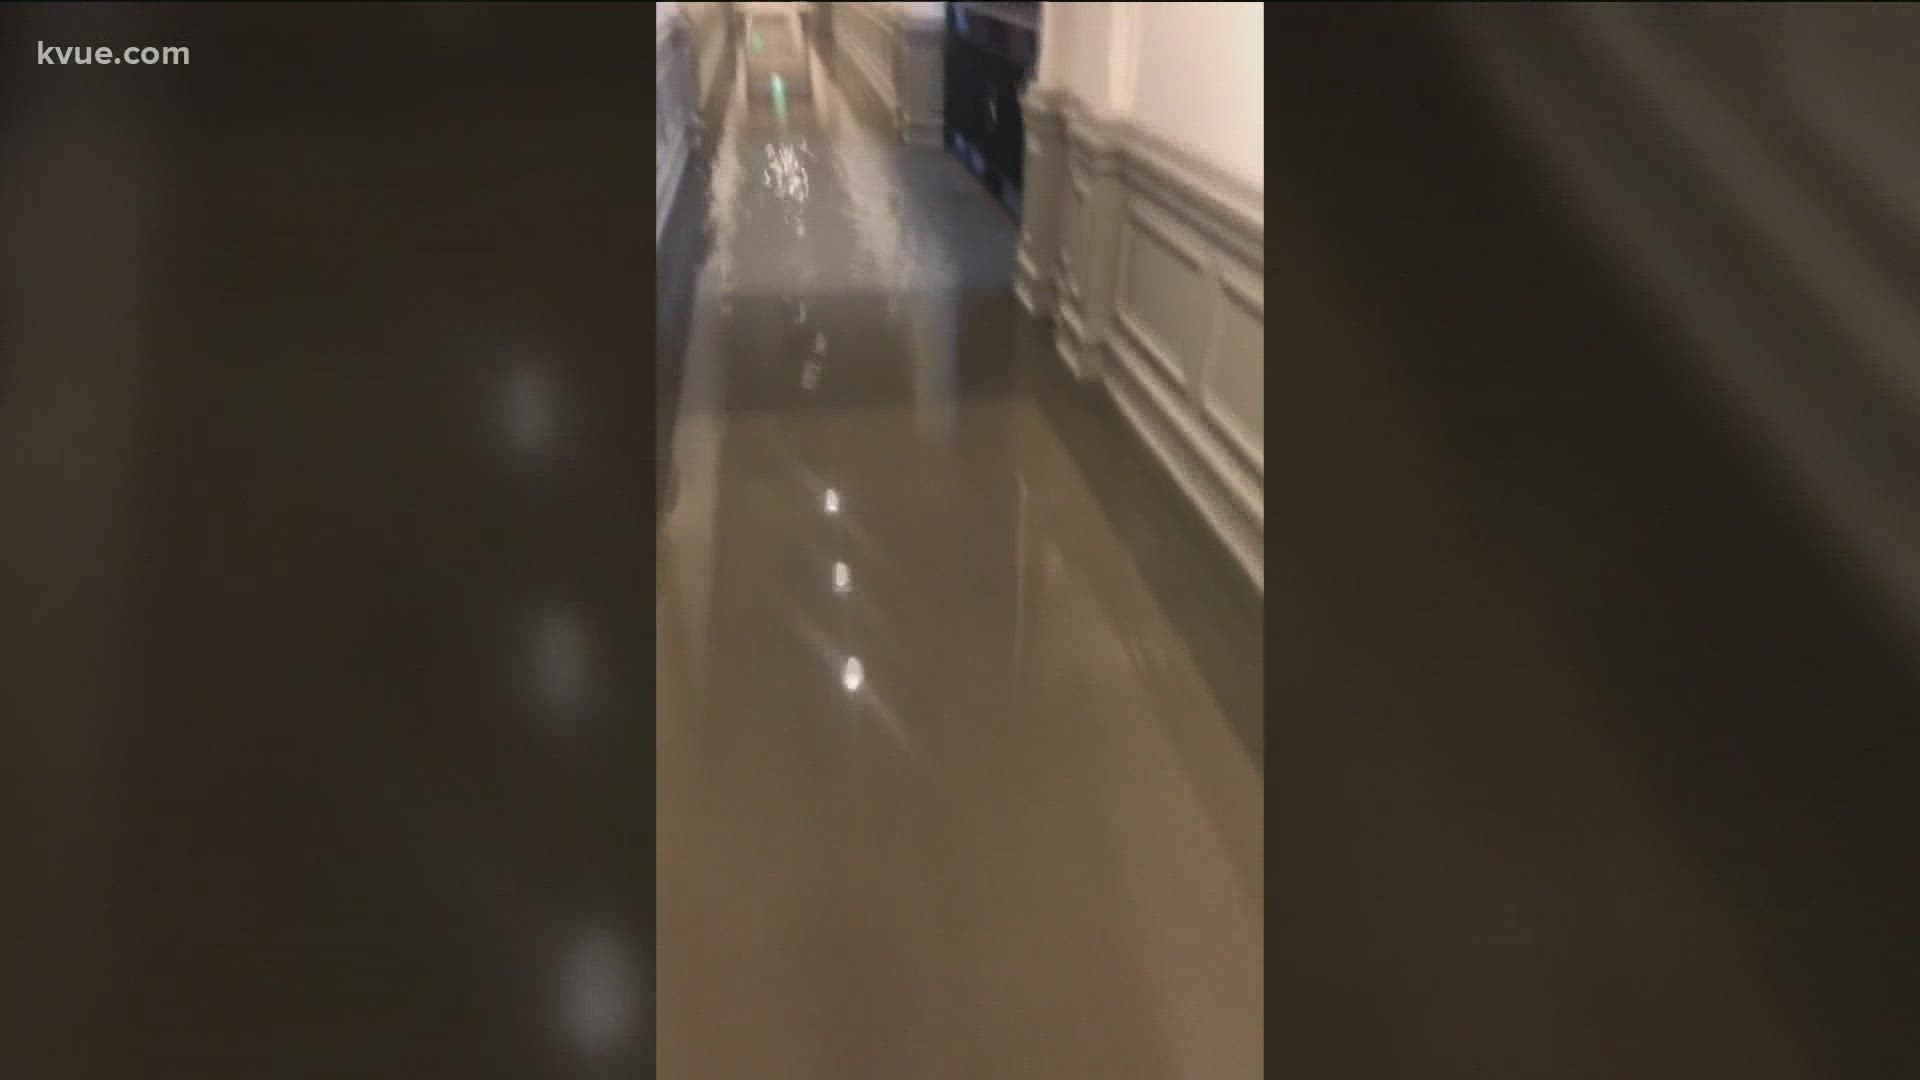 A spokesperson for the State Preservation Board said the flooding was caused by a storm water drain getting clogged, backing up water into the capitol extension.